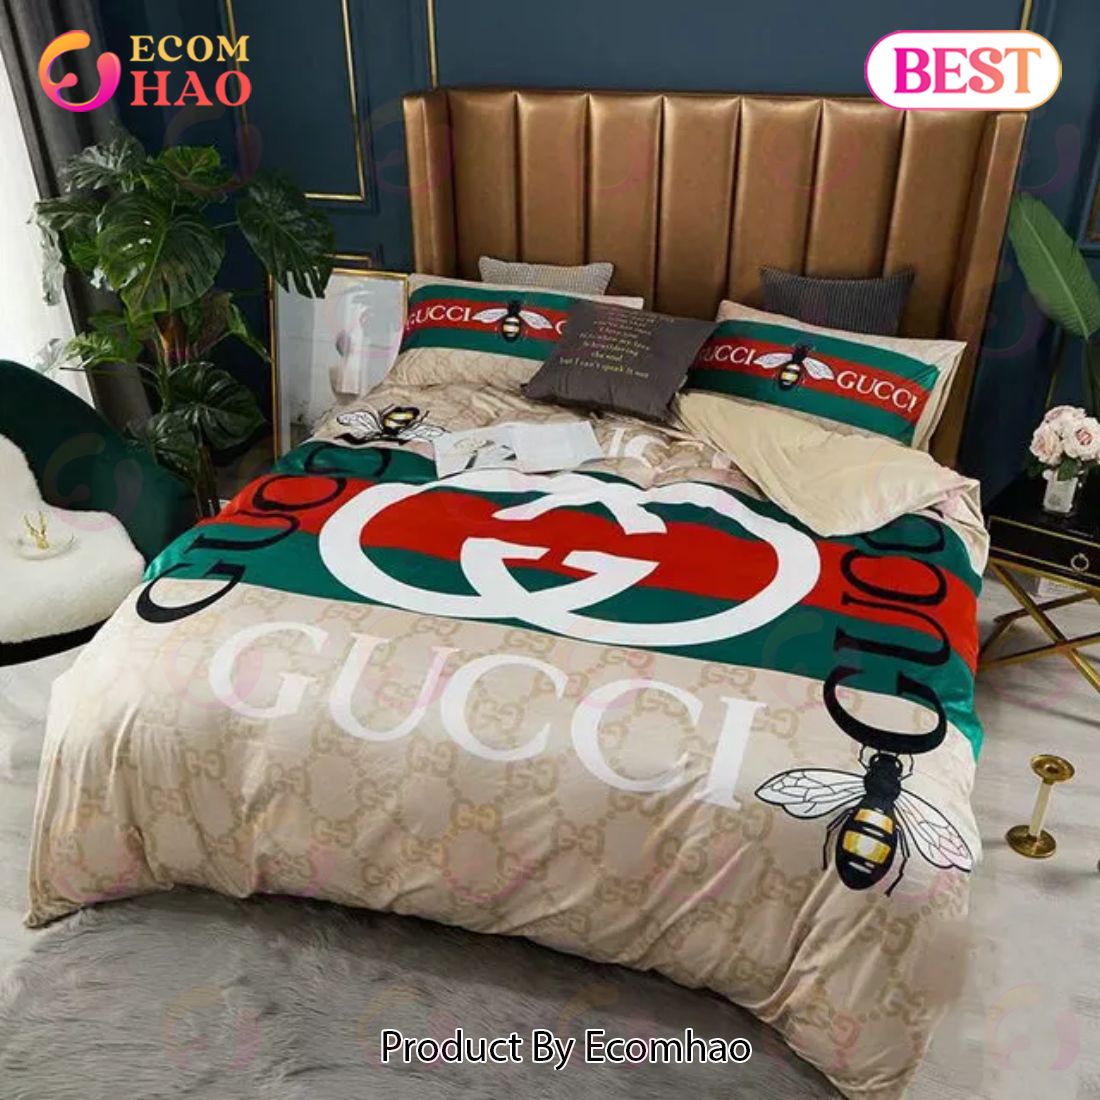 Bee Gucci Luxury Brand Bedding Sets Bedspread Duvet Cover Set Bedroom Decor Thanksgiving Decorations For Home Best Luxury Bed Sets Gift Thankgivings And Christmas